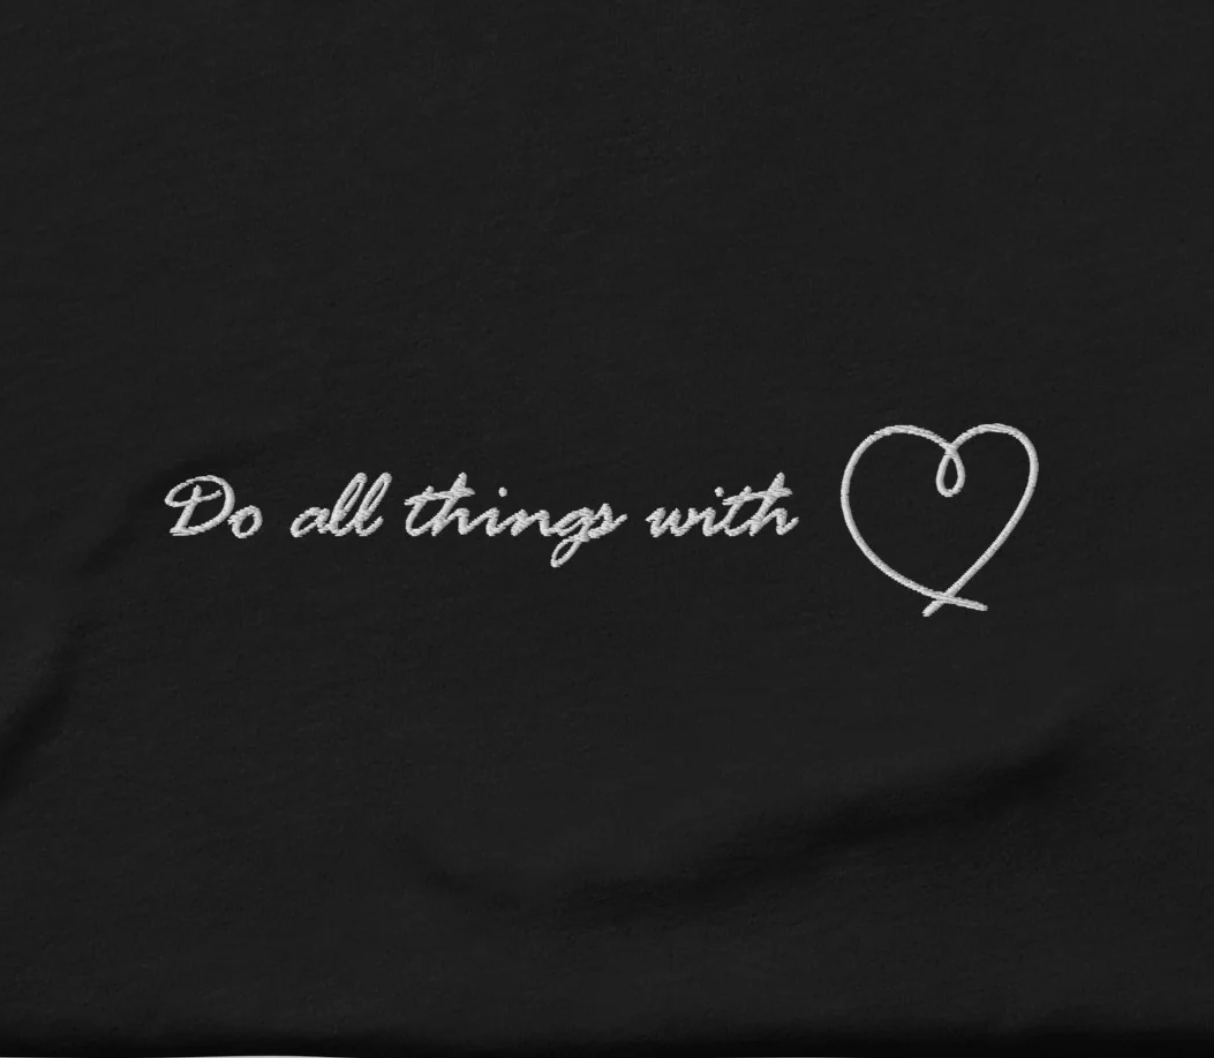 Do all things with love - besticktes T-Shirt